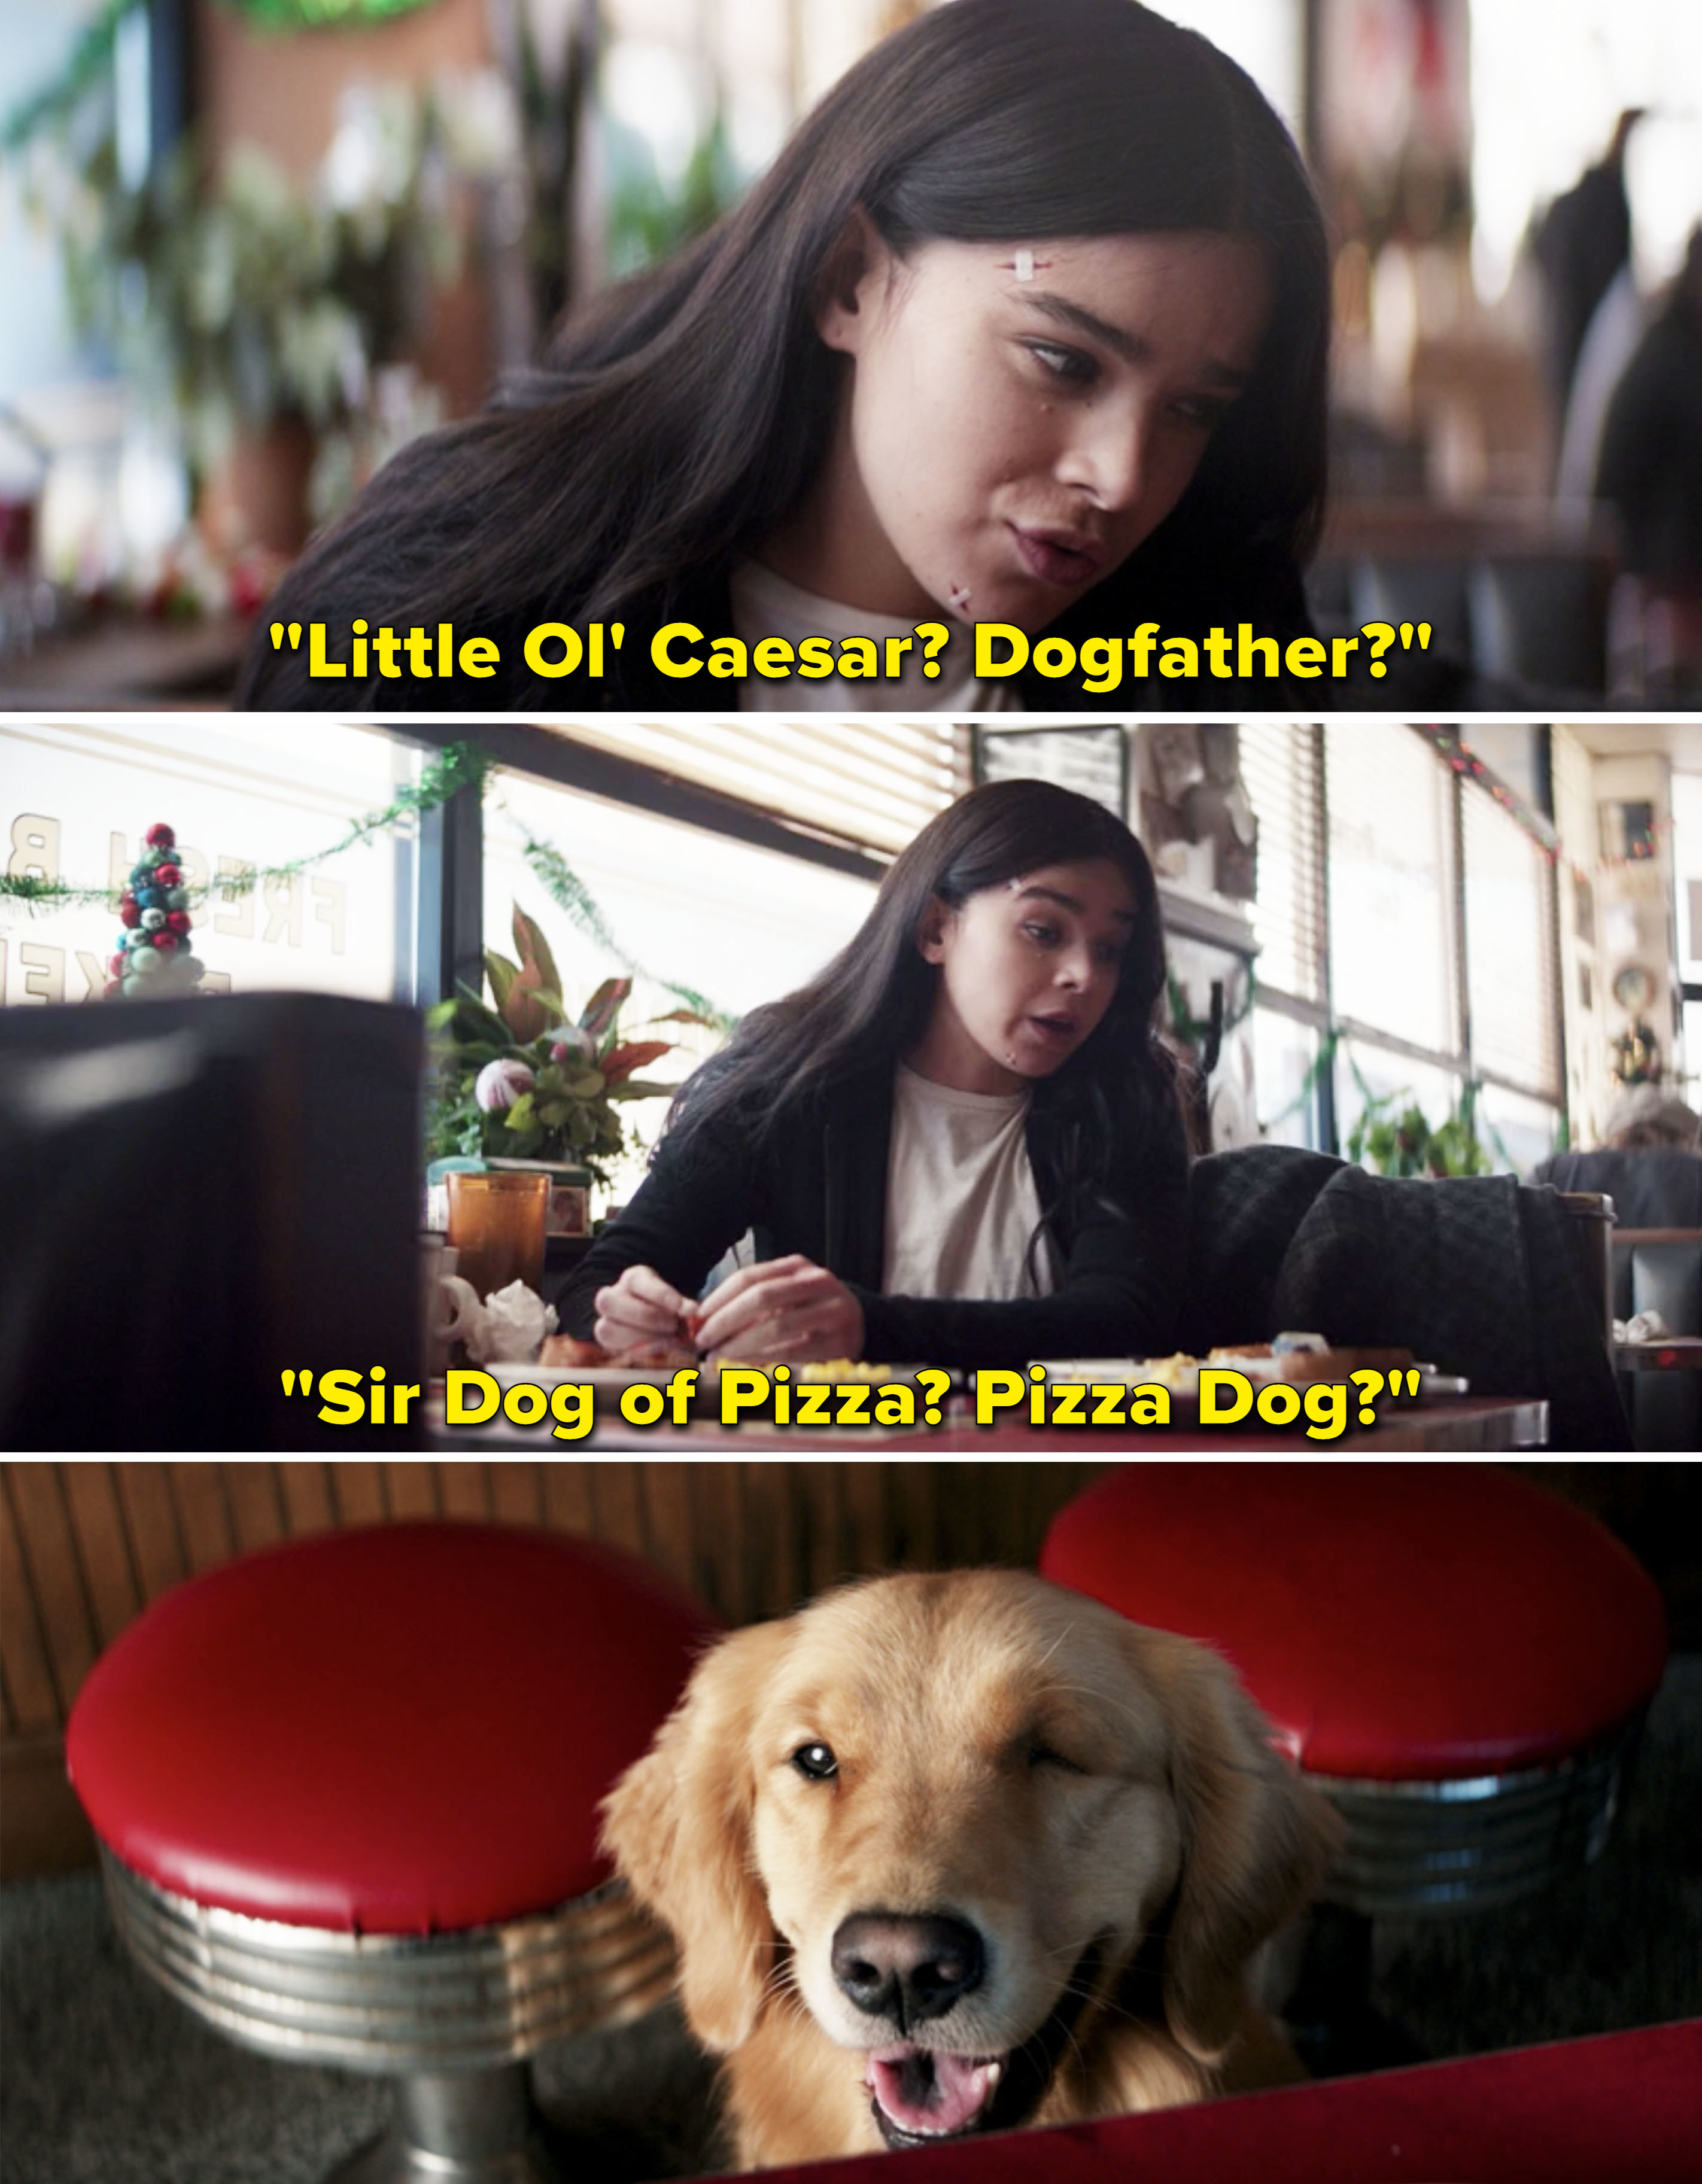 Kate saying &quot;Pizza Dog&quot; and the dog smiling